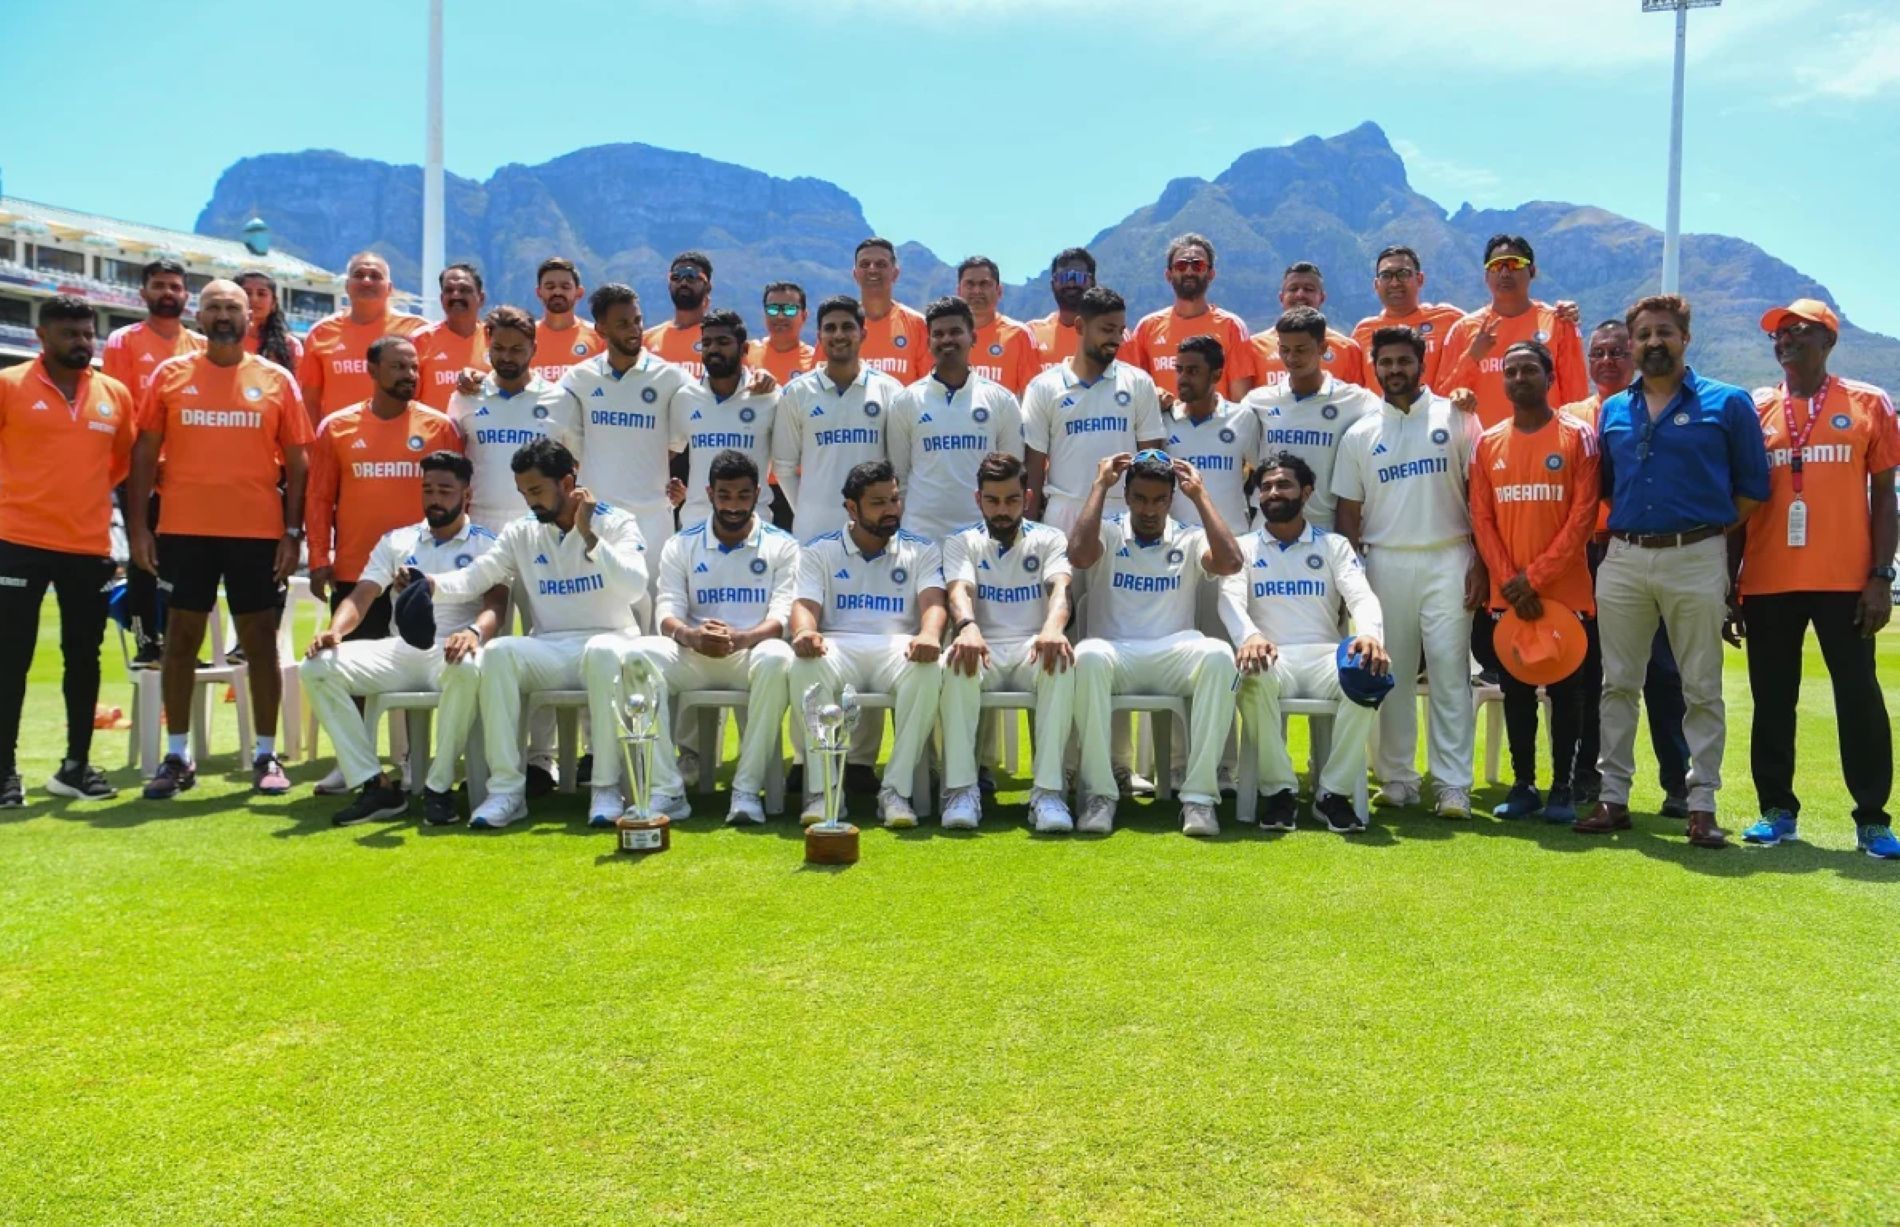 The Indian players pose after pulling off sensational win at Cape Town